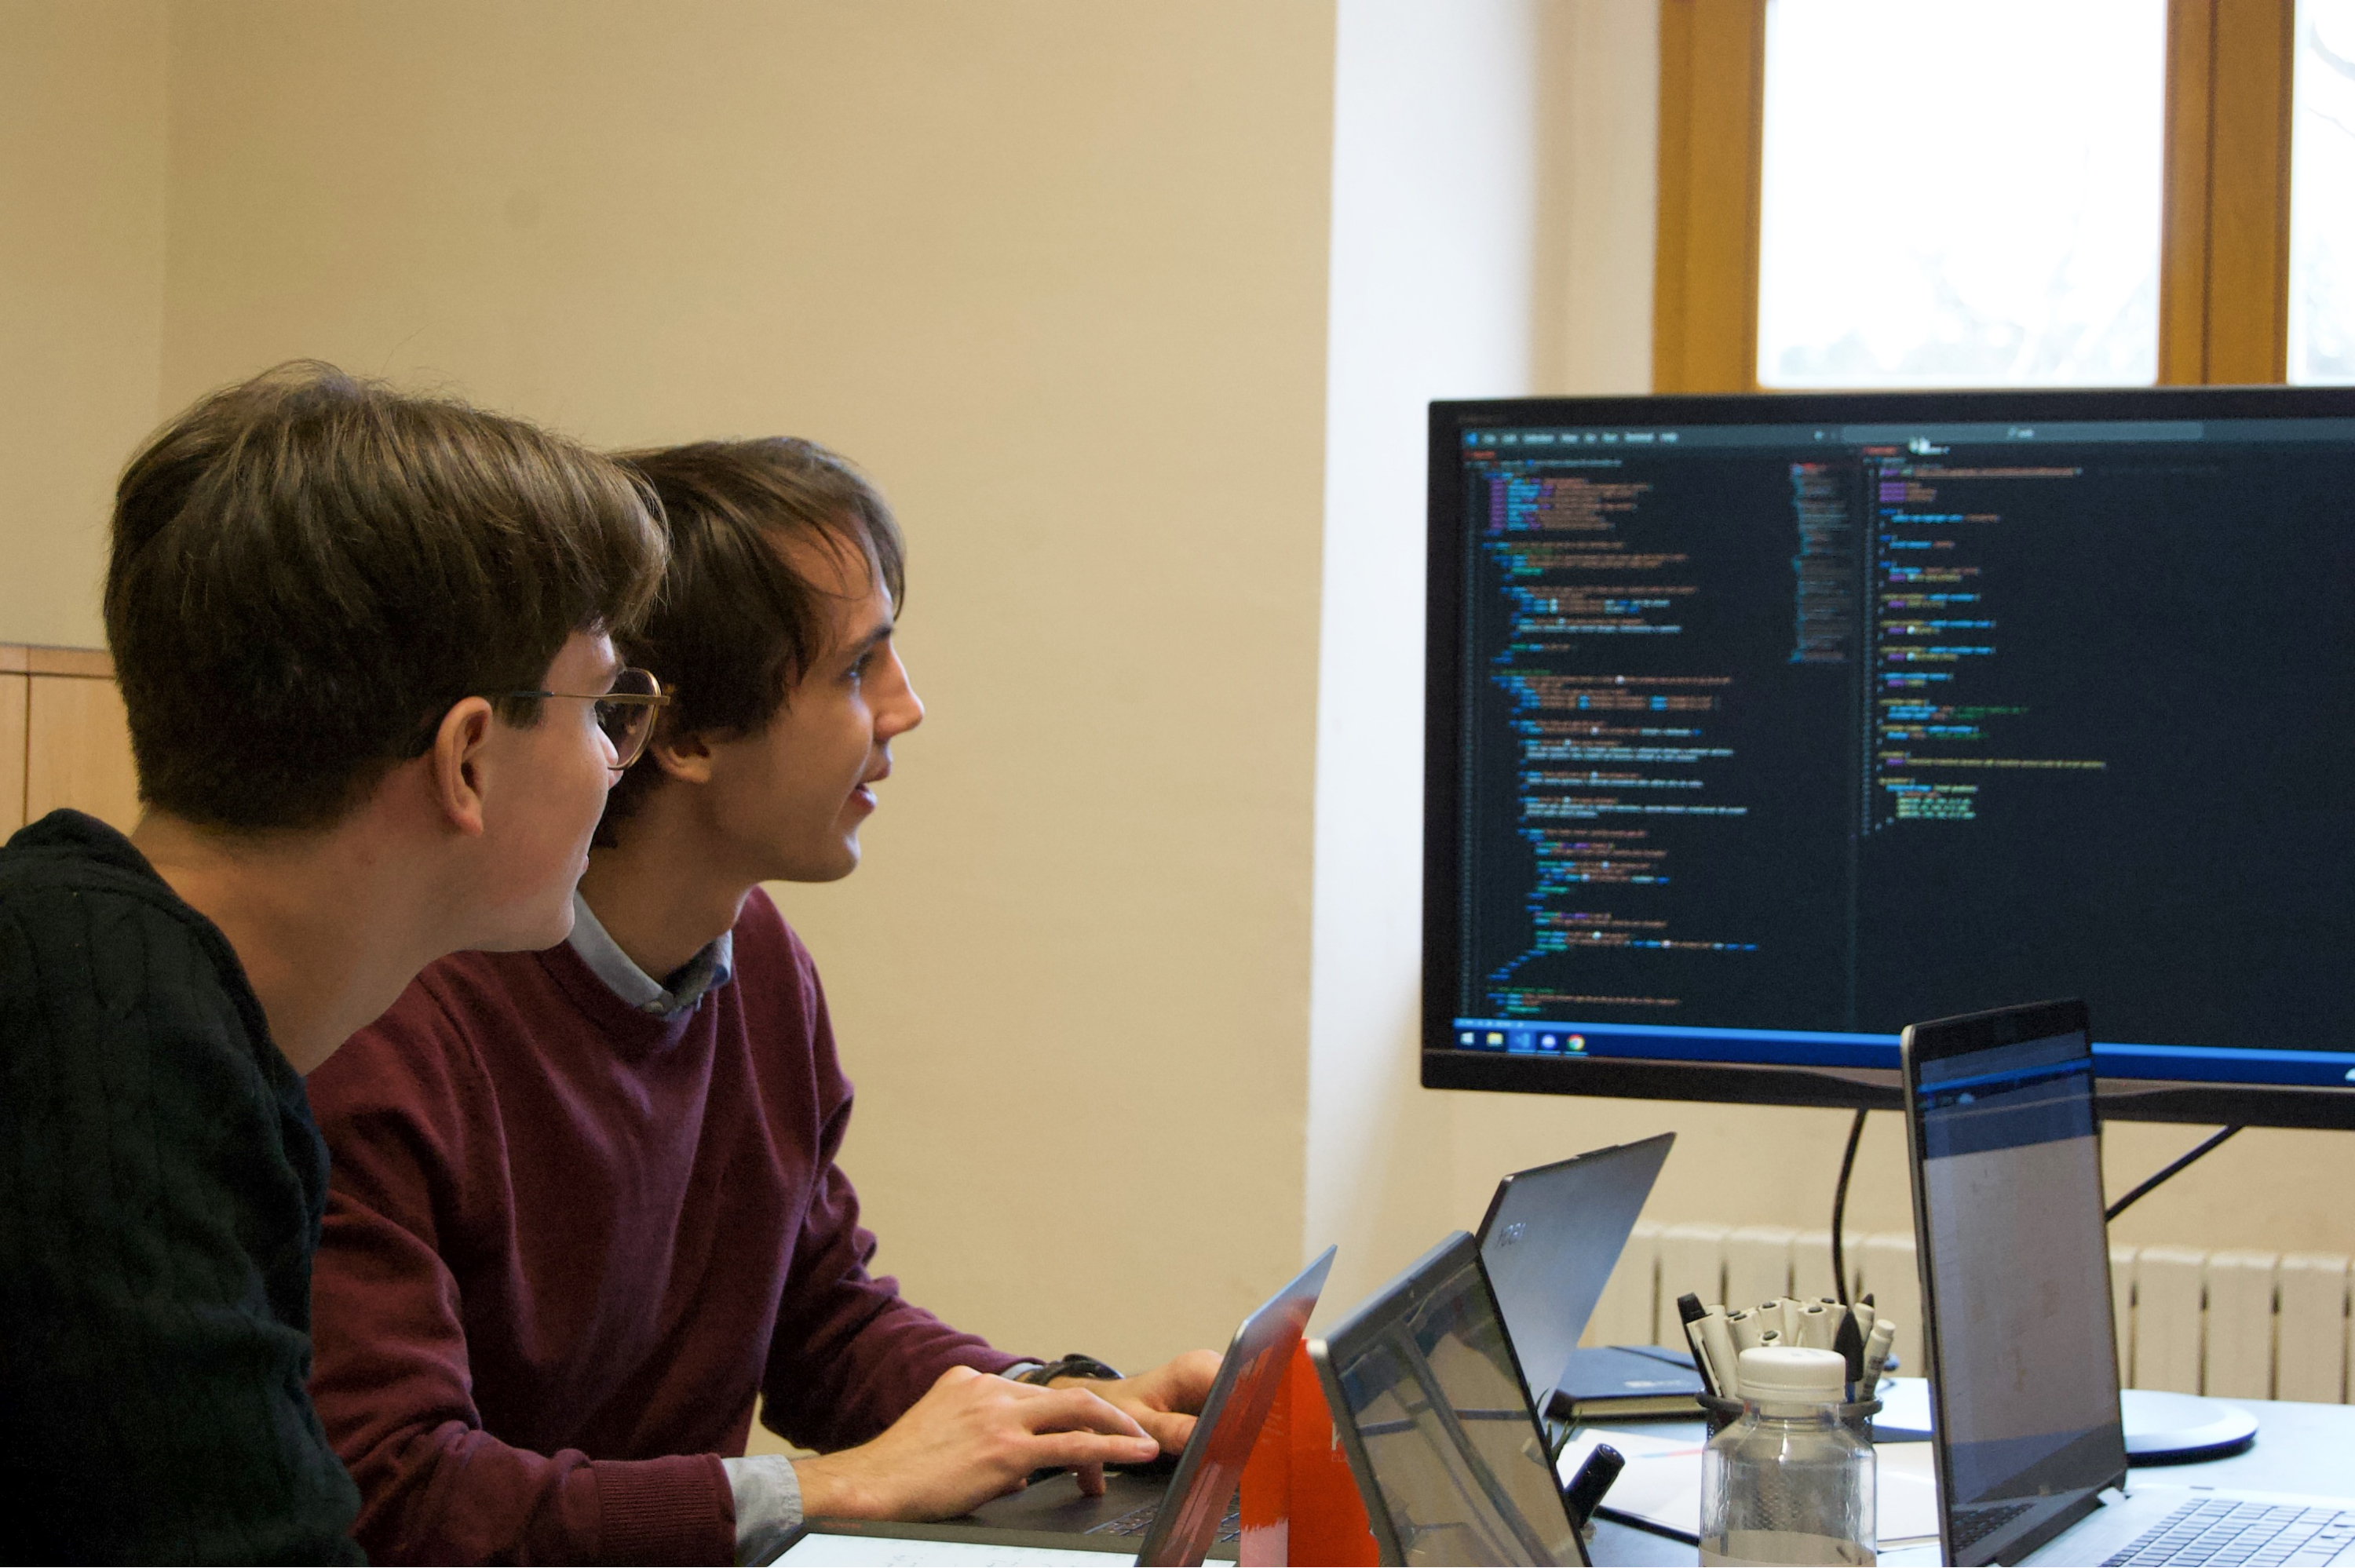 Two developers going through code on a large screen.